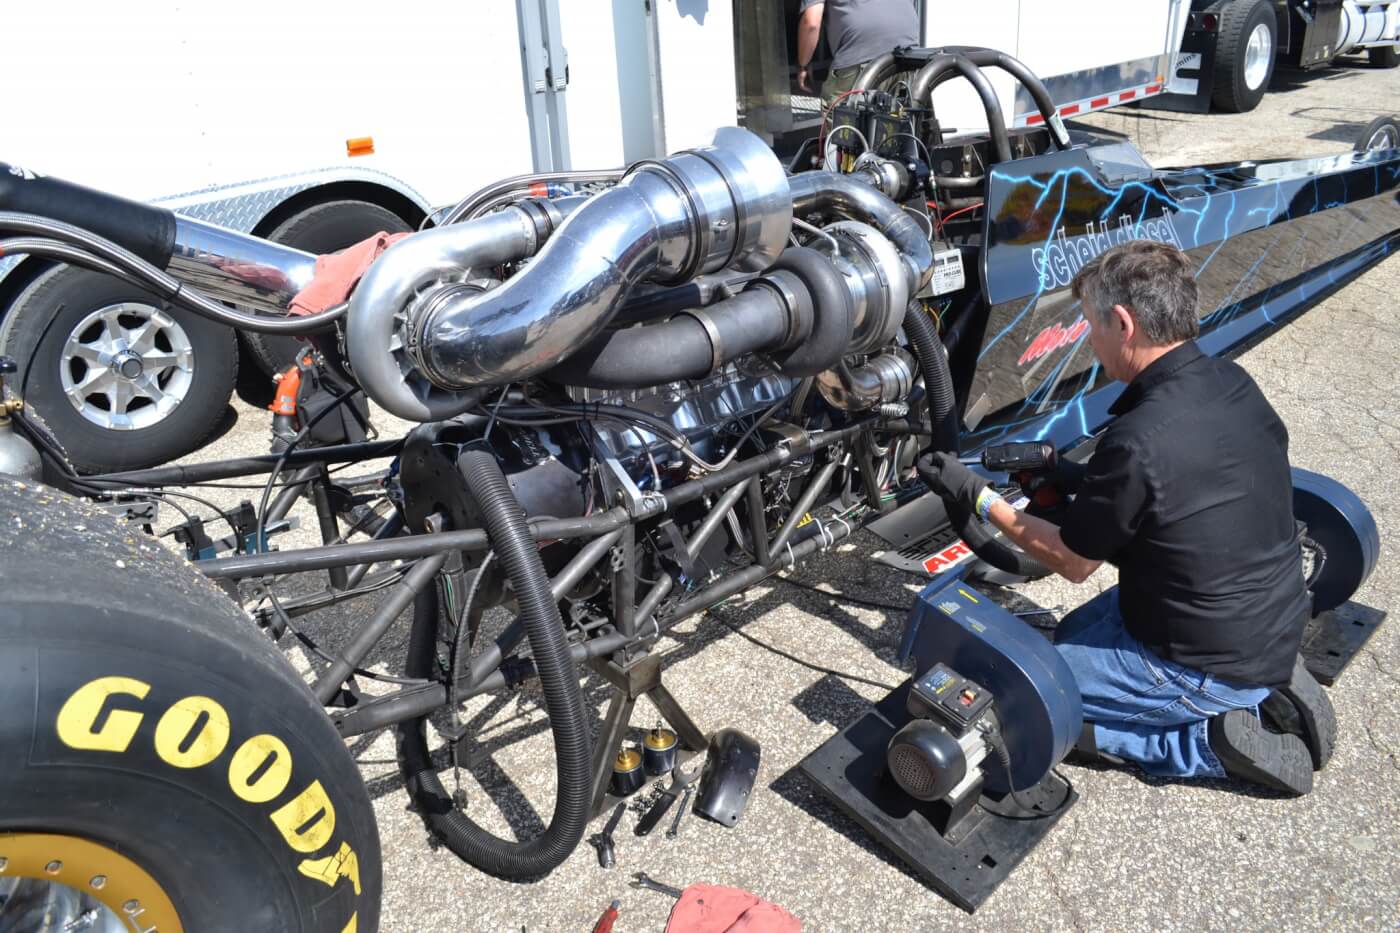 Top Diesel is the NHRDA's quickest and fastest class, and is home to such vehicles as the 6-second Scheid dragster, which unfortunately lost a transmission in qualifying. Not one to go out without a fight, the team swapped in a spare Lenco just in time for eliminations.